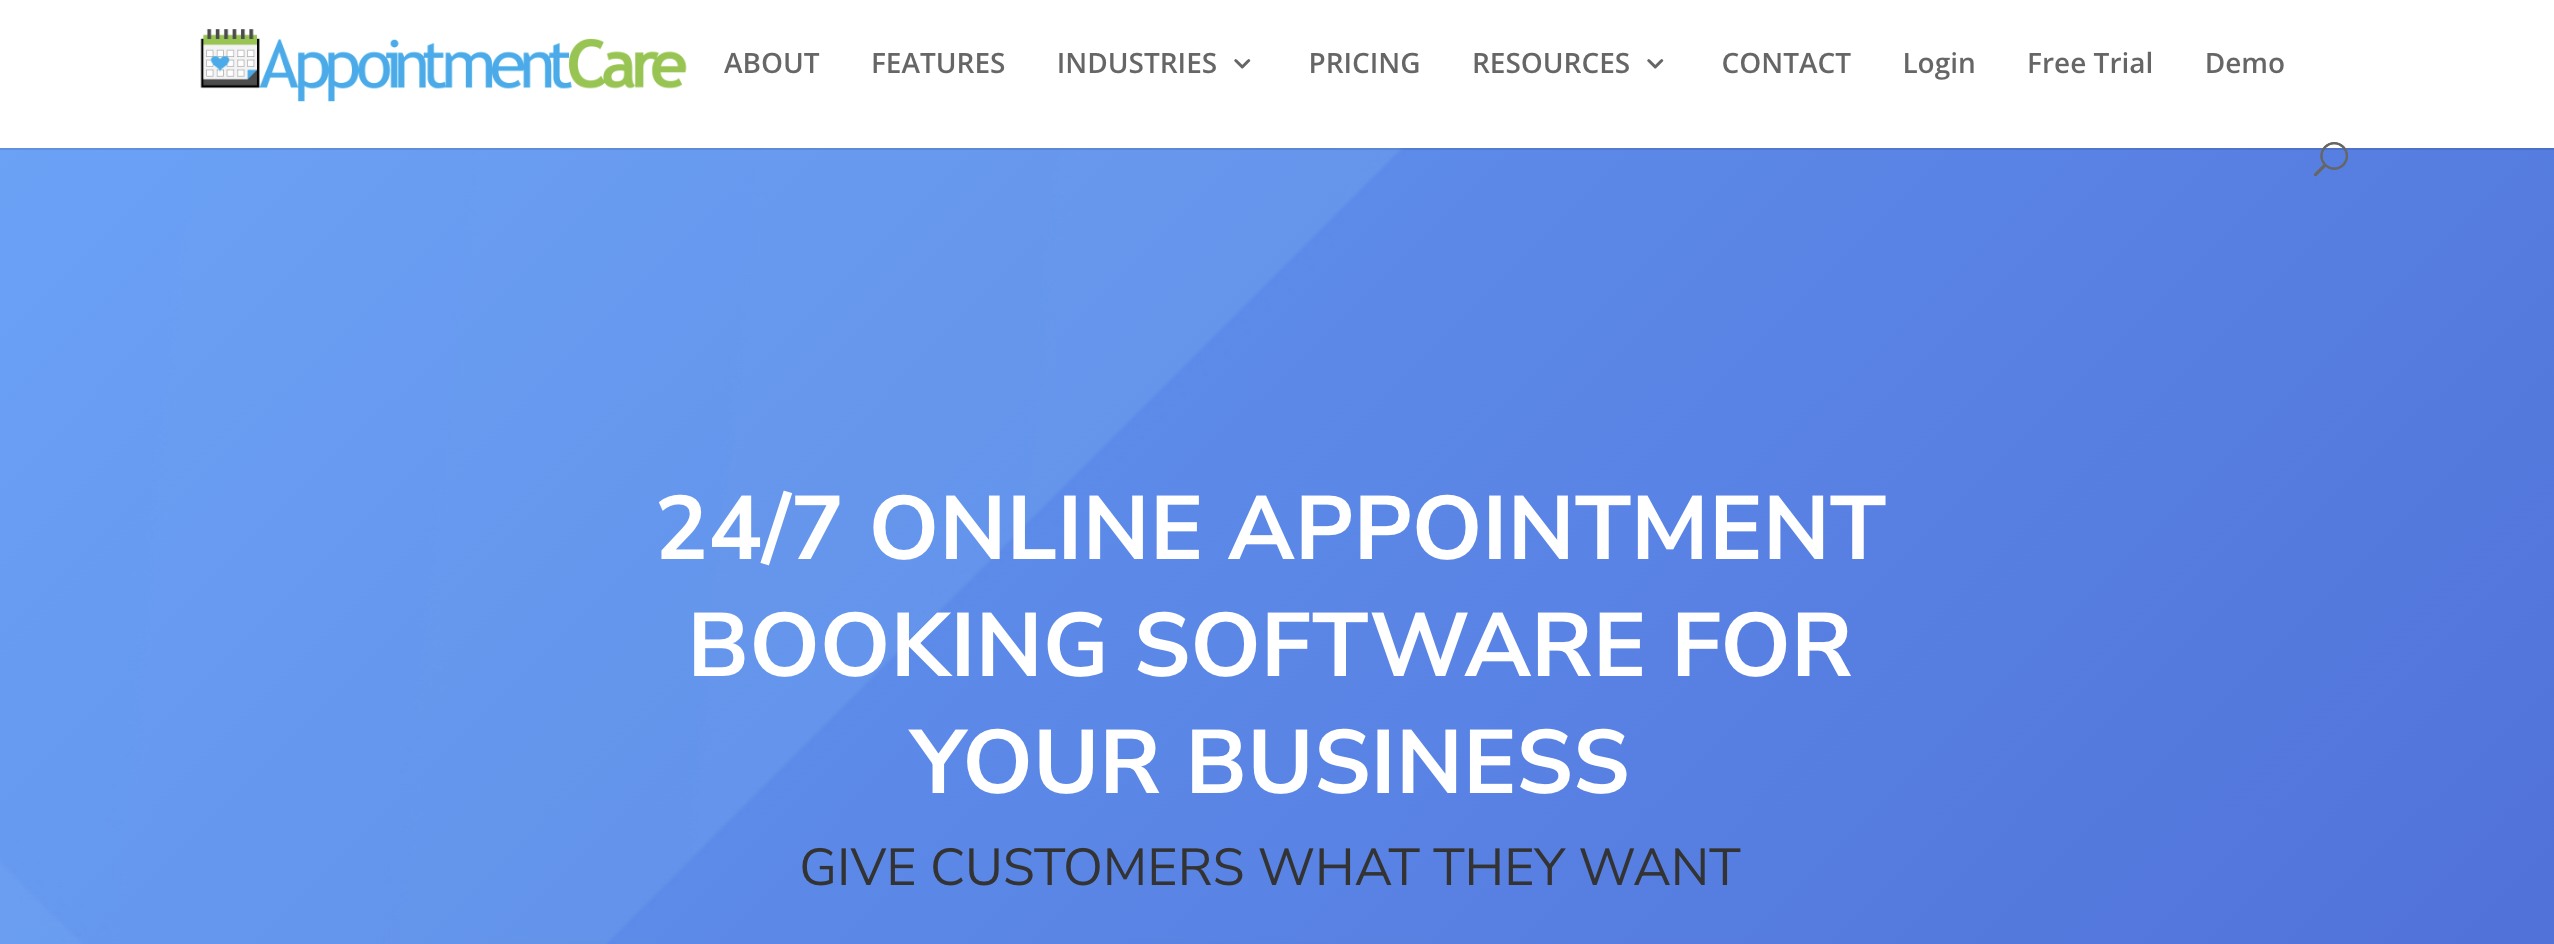 AppointmentCare homepage screenshot